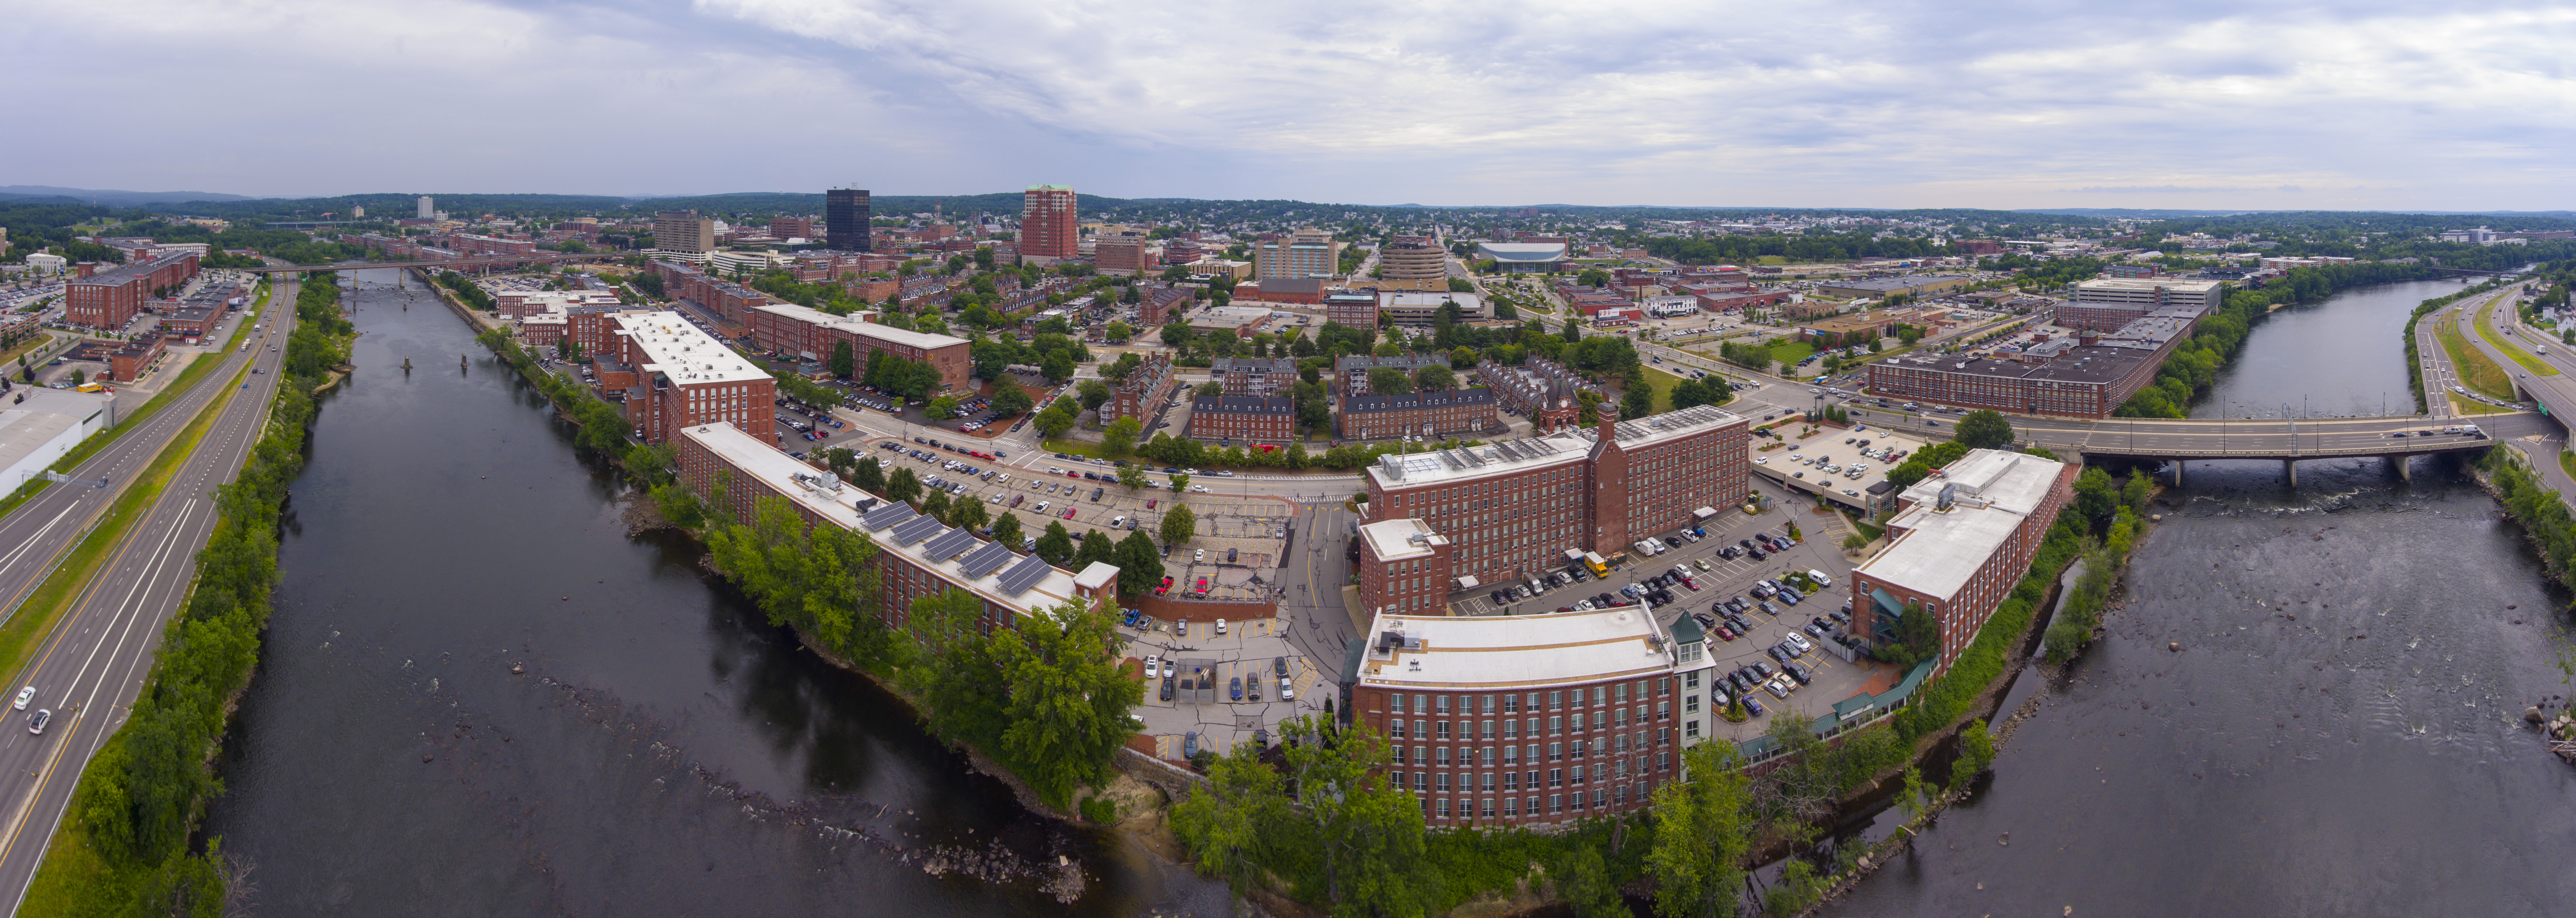 Manchester downtown building including City Hall Plaza and Brady Sullivan Plaza with Merrimack River in the front panorama aerial view, Manchester, New Hampshire, NH, USA.